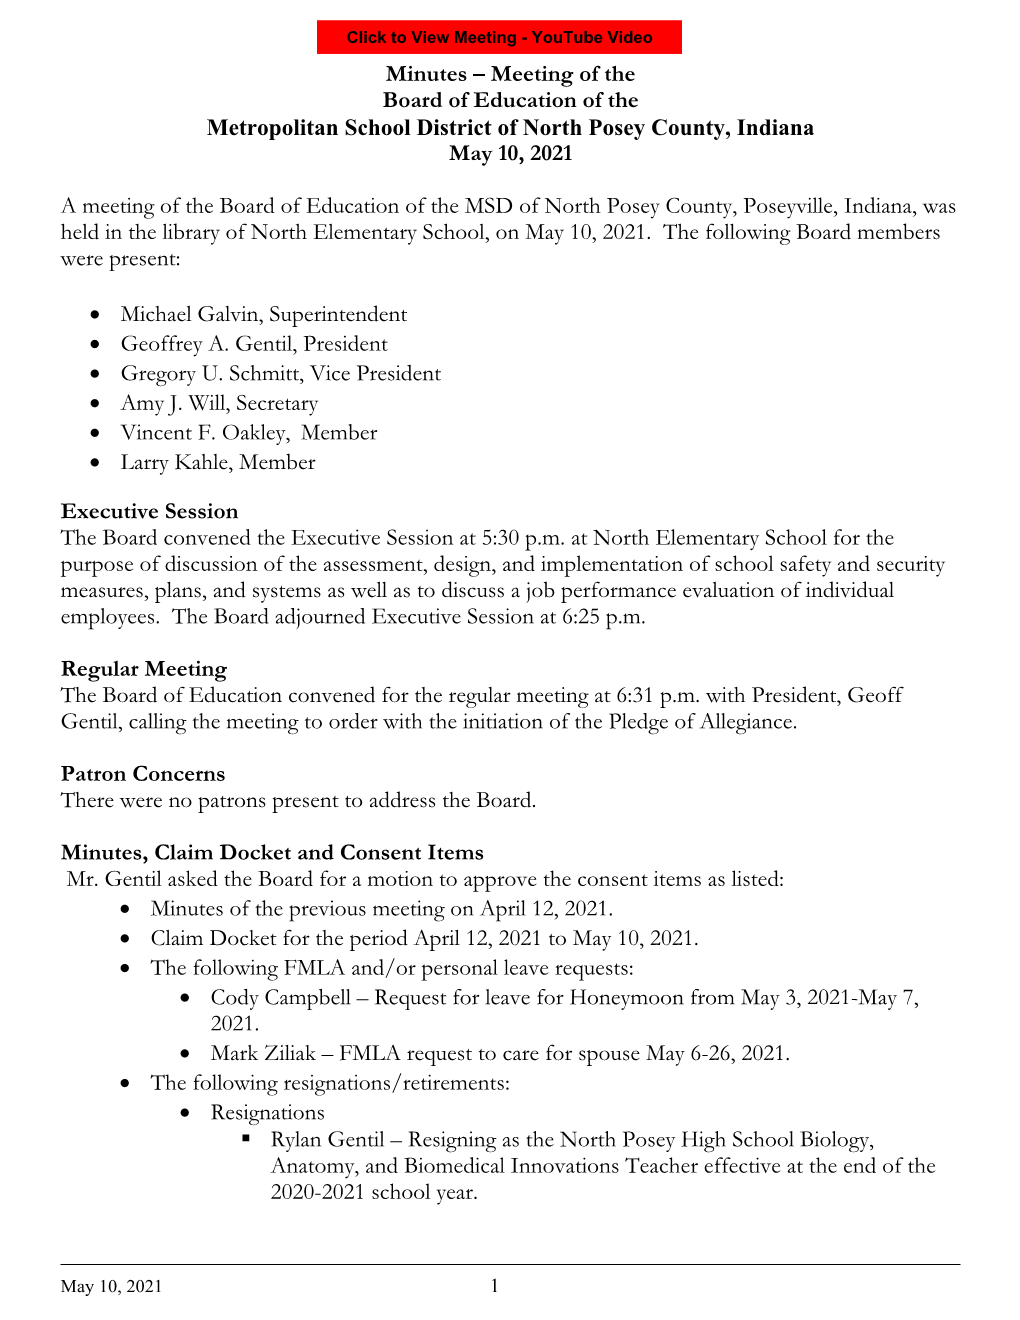 Minutes – Meeting of the Board of Education of the Metropolitan School District of North Posey County, Indiana May 10, 2021